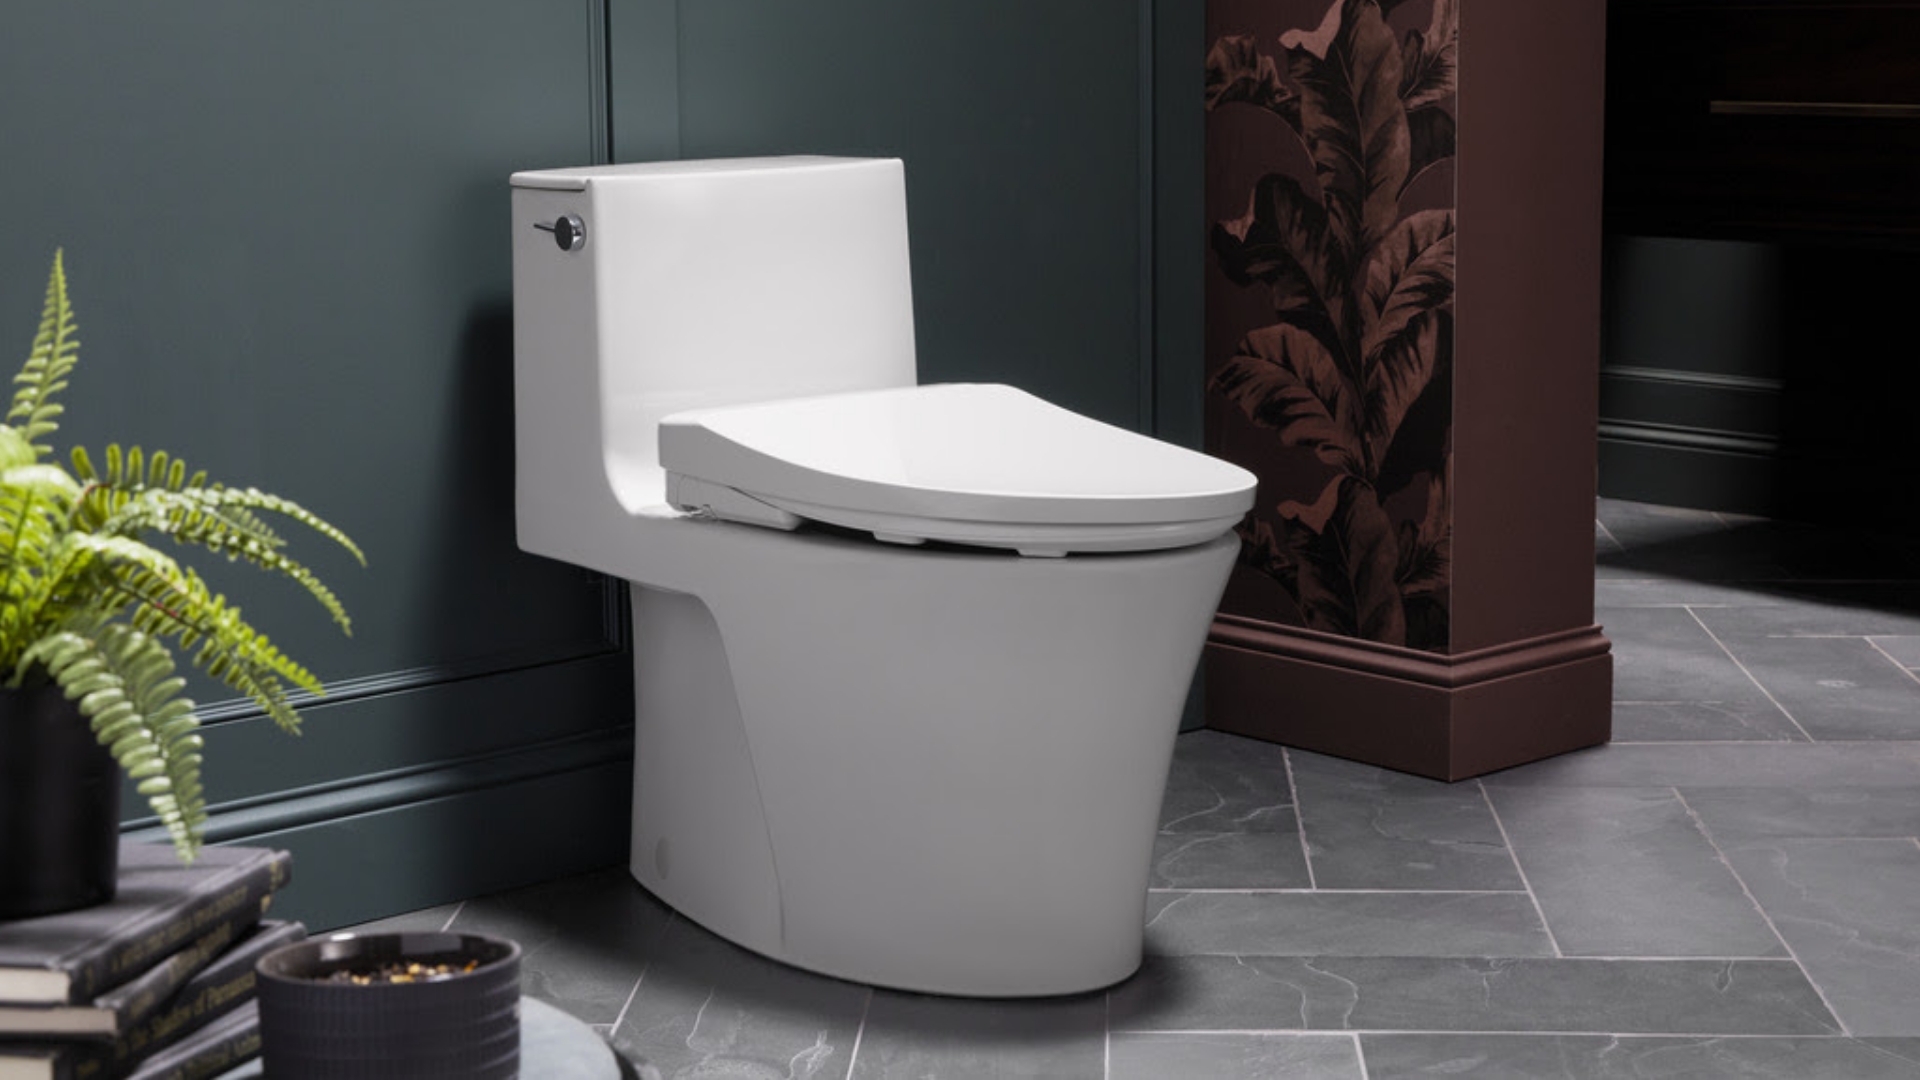 With the Kohler PureWash E930 bidet seat, cleaning up after your messes may be done "hands-free."